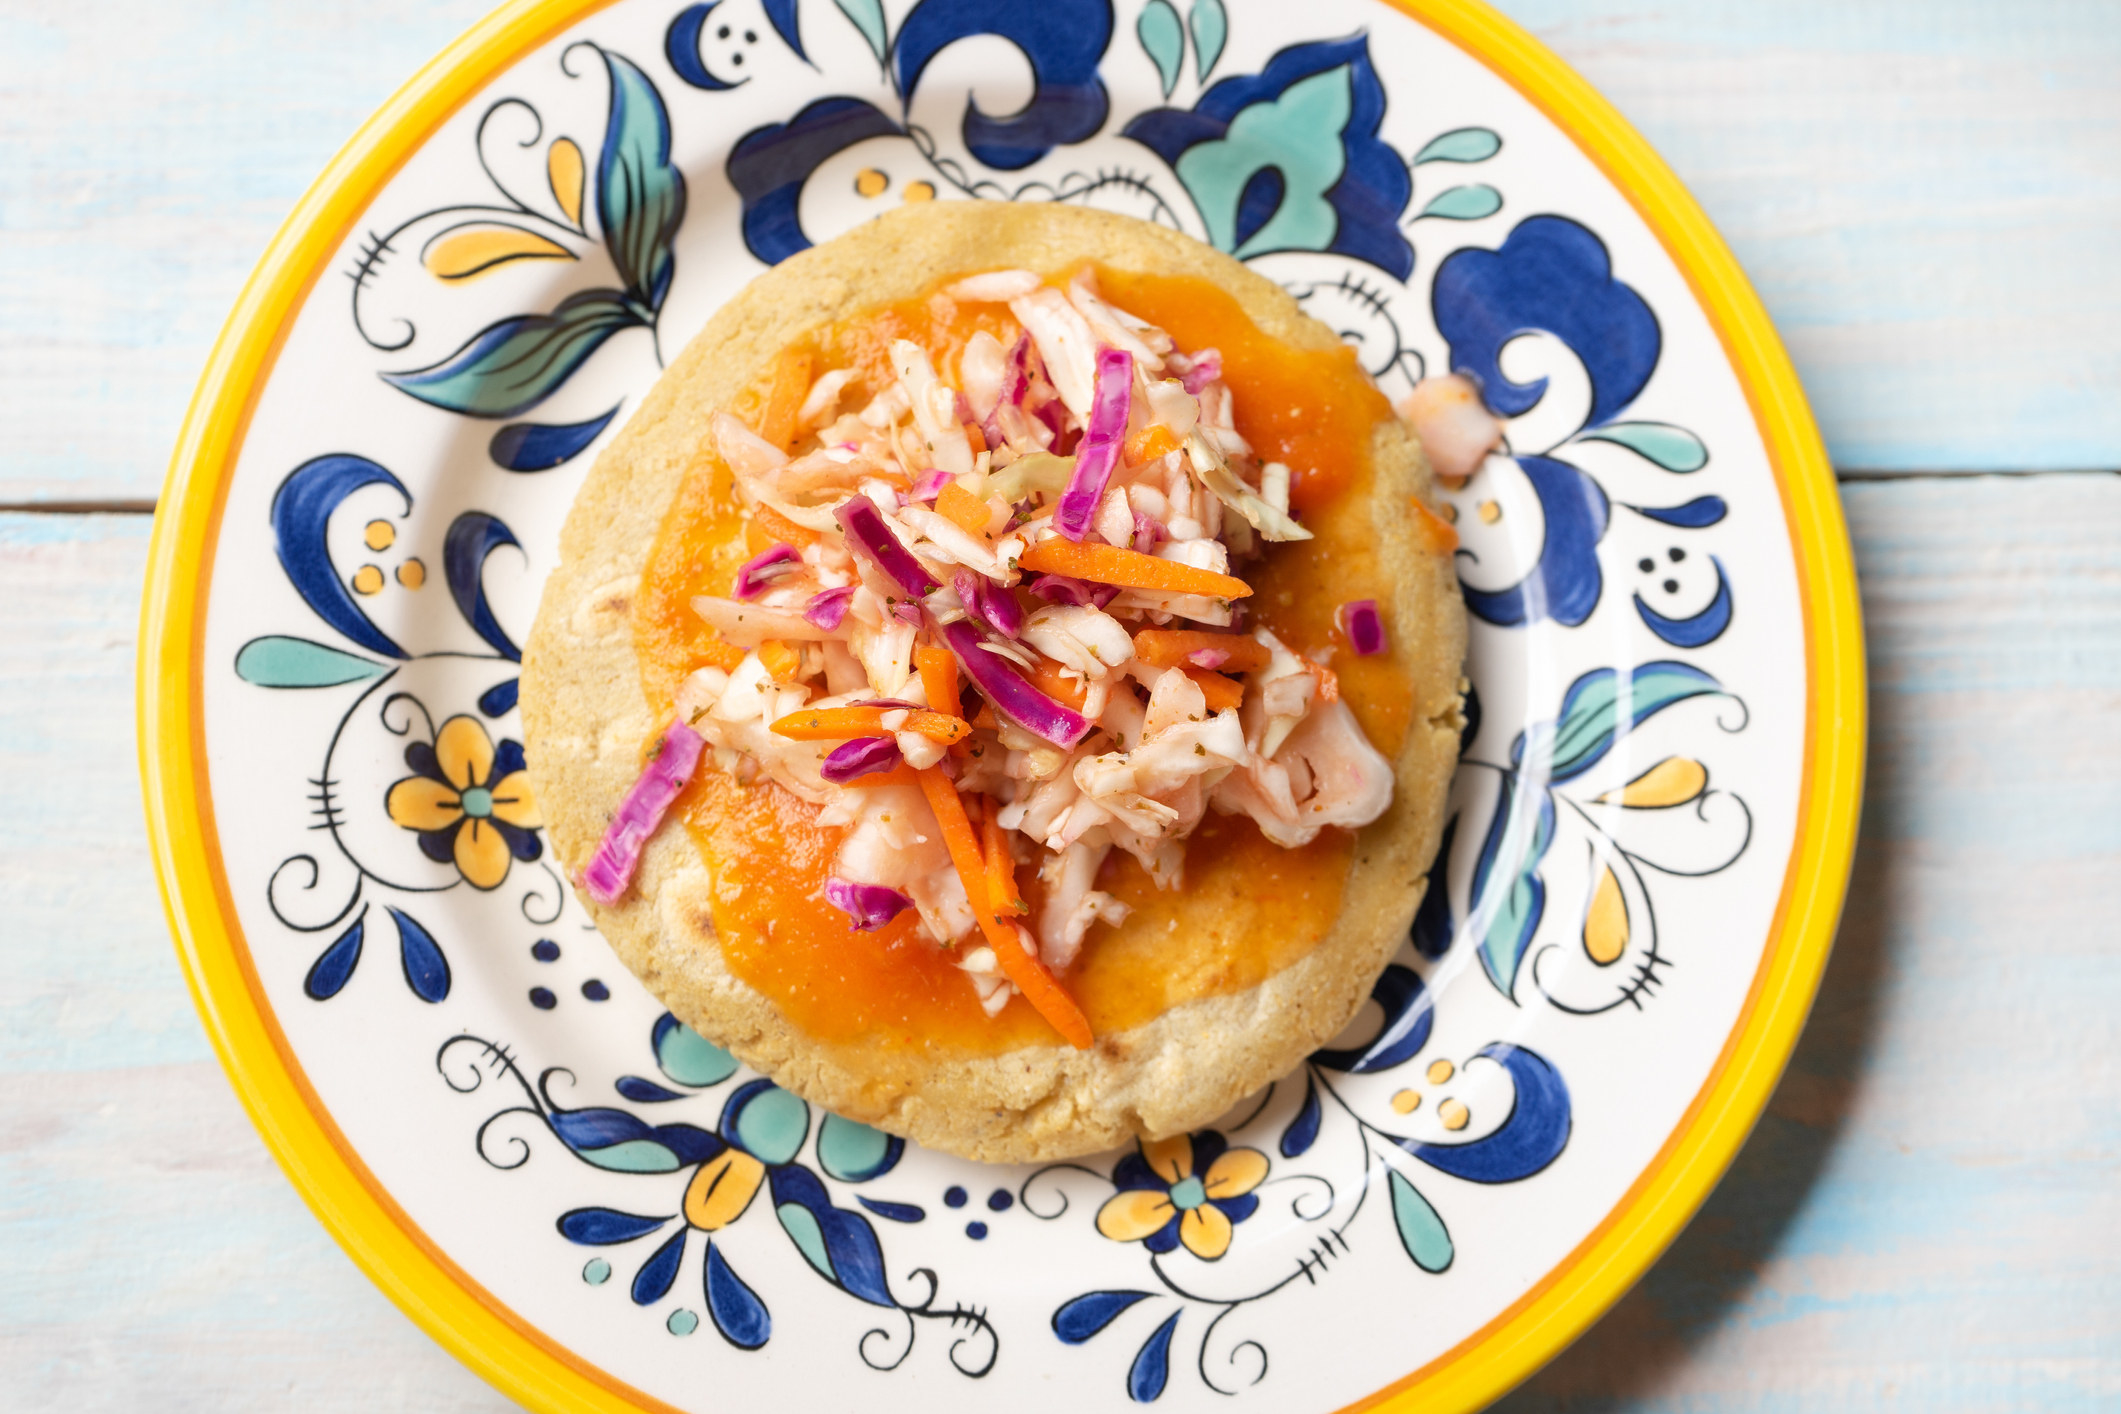 A Venezuelan pupusa topped with pickled cabbage.